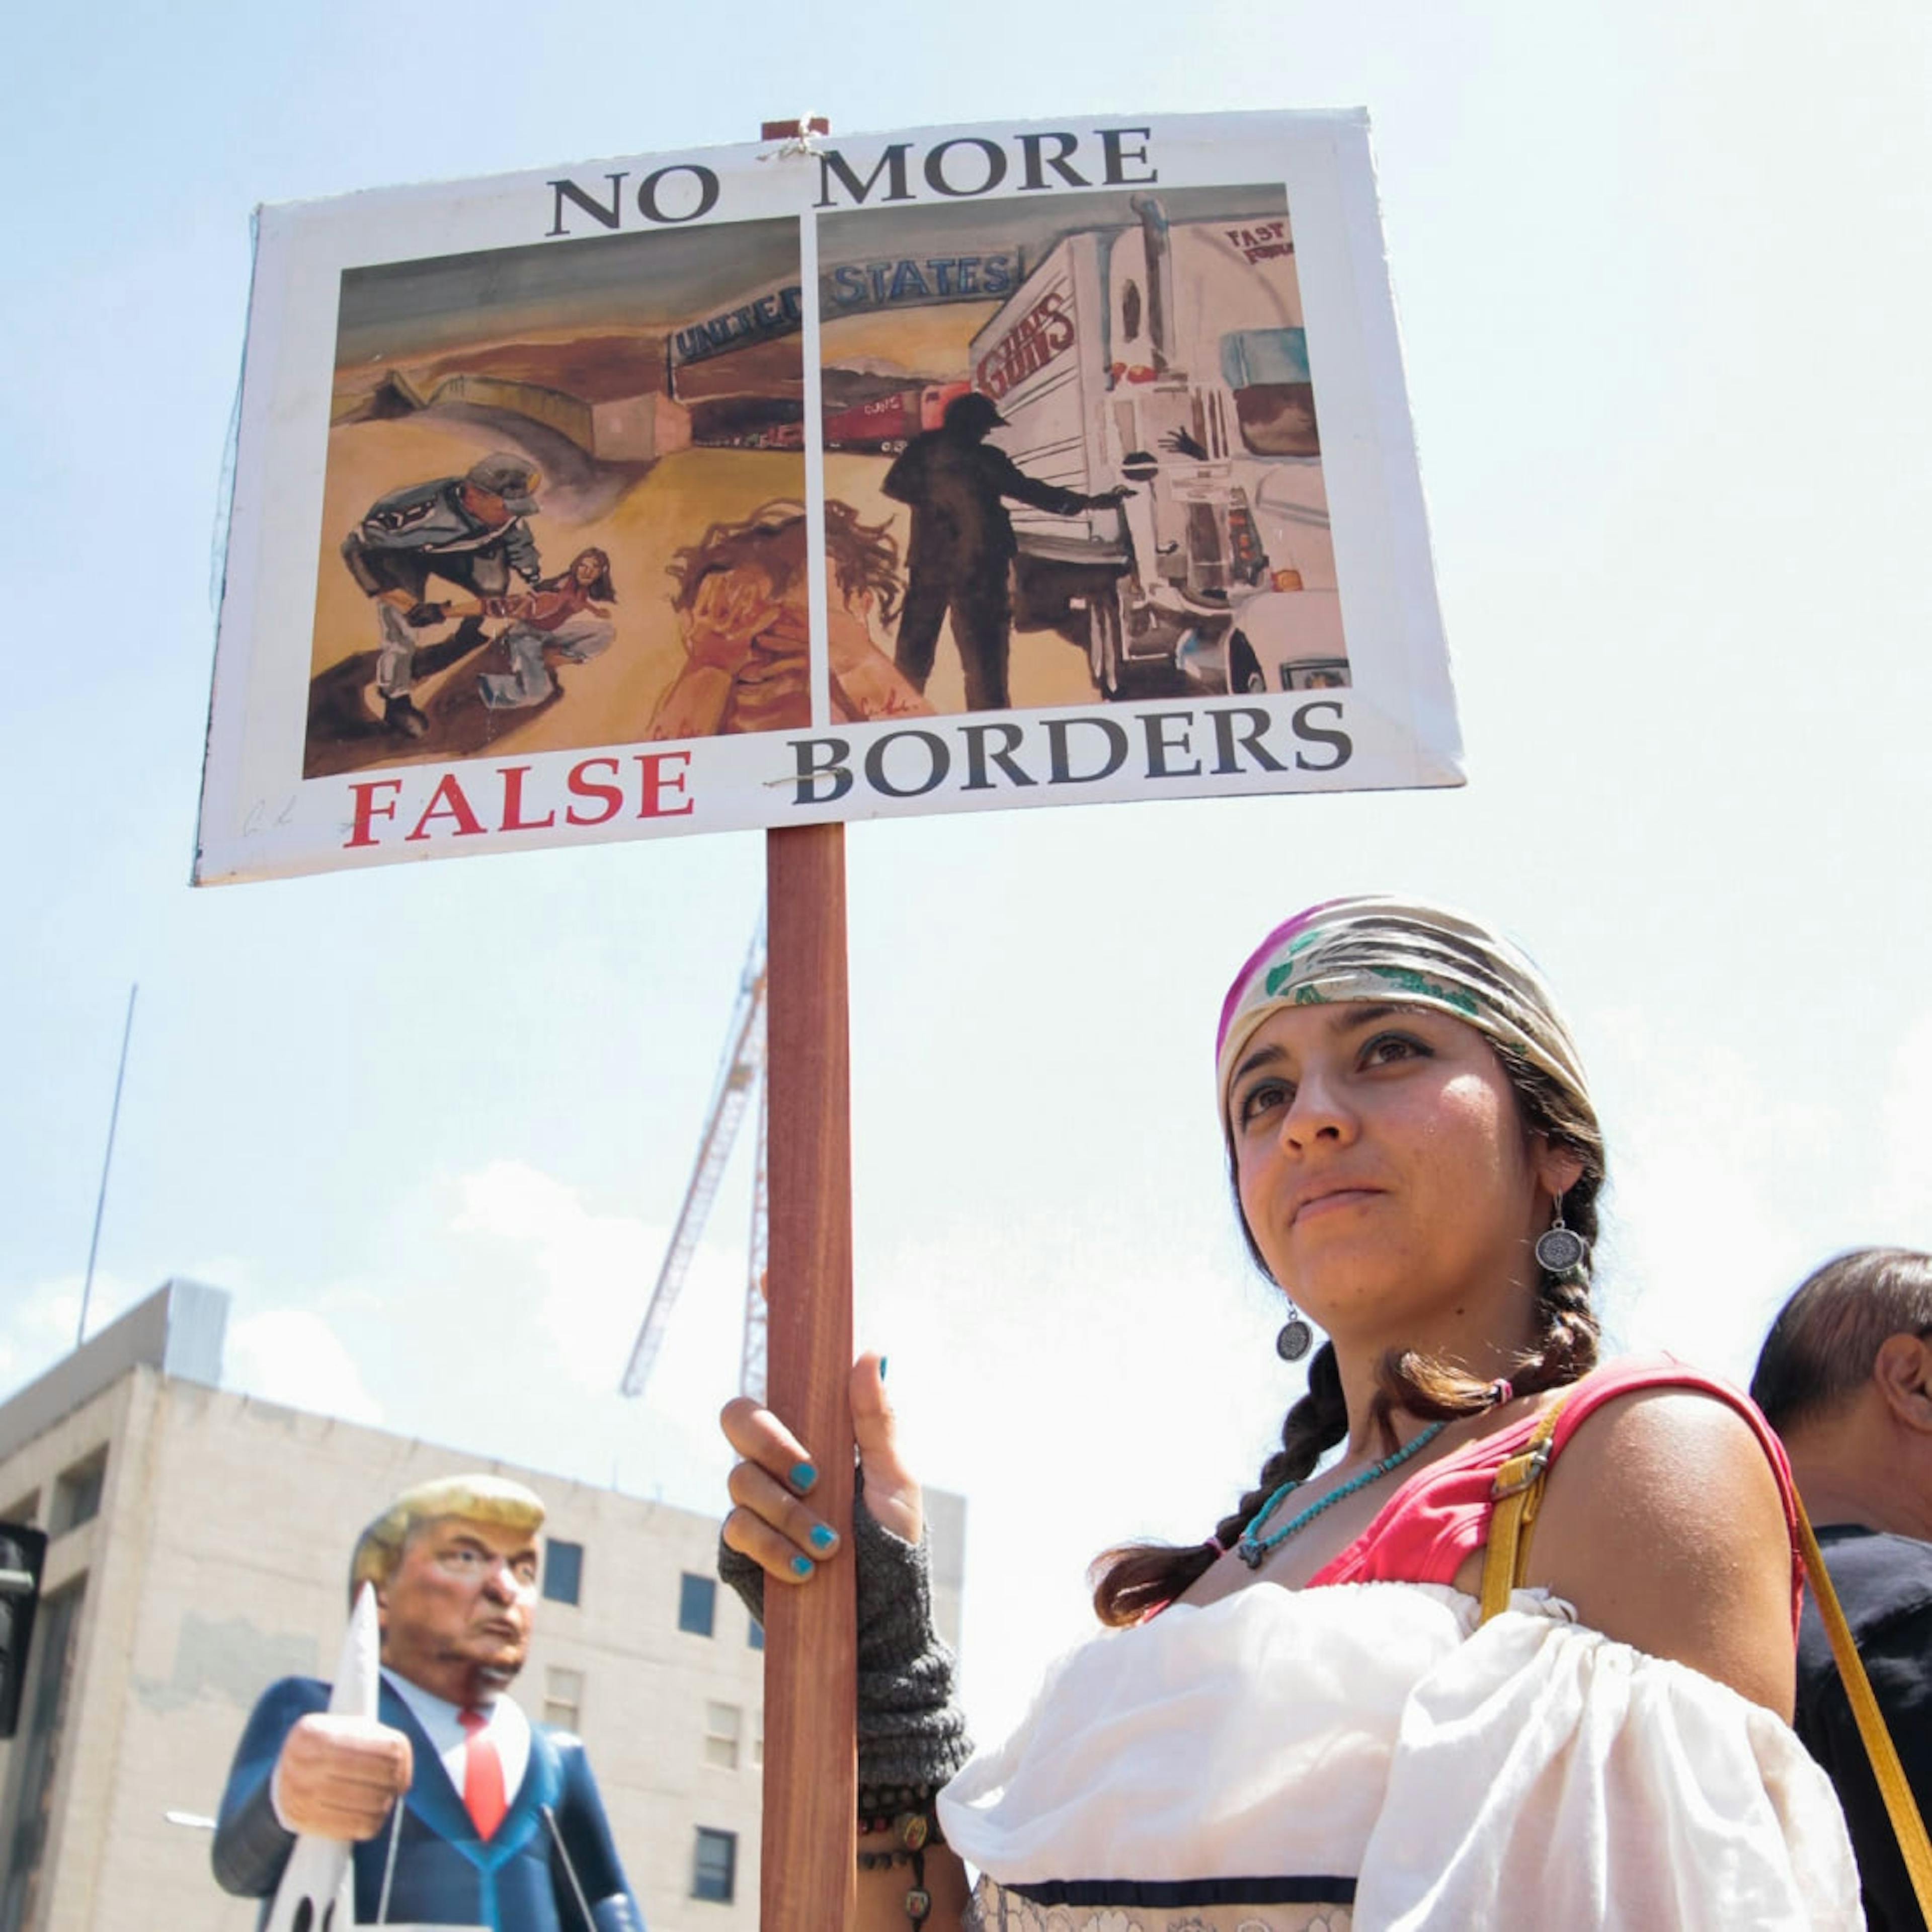 A protester holds a sign reading "No More False Borders" at a pro-immigration rally in the United States.